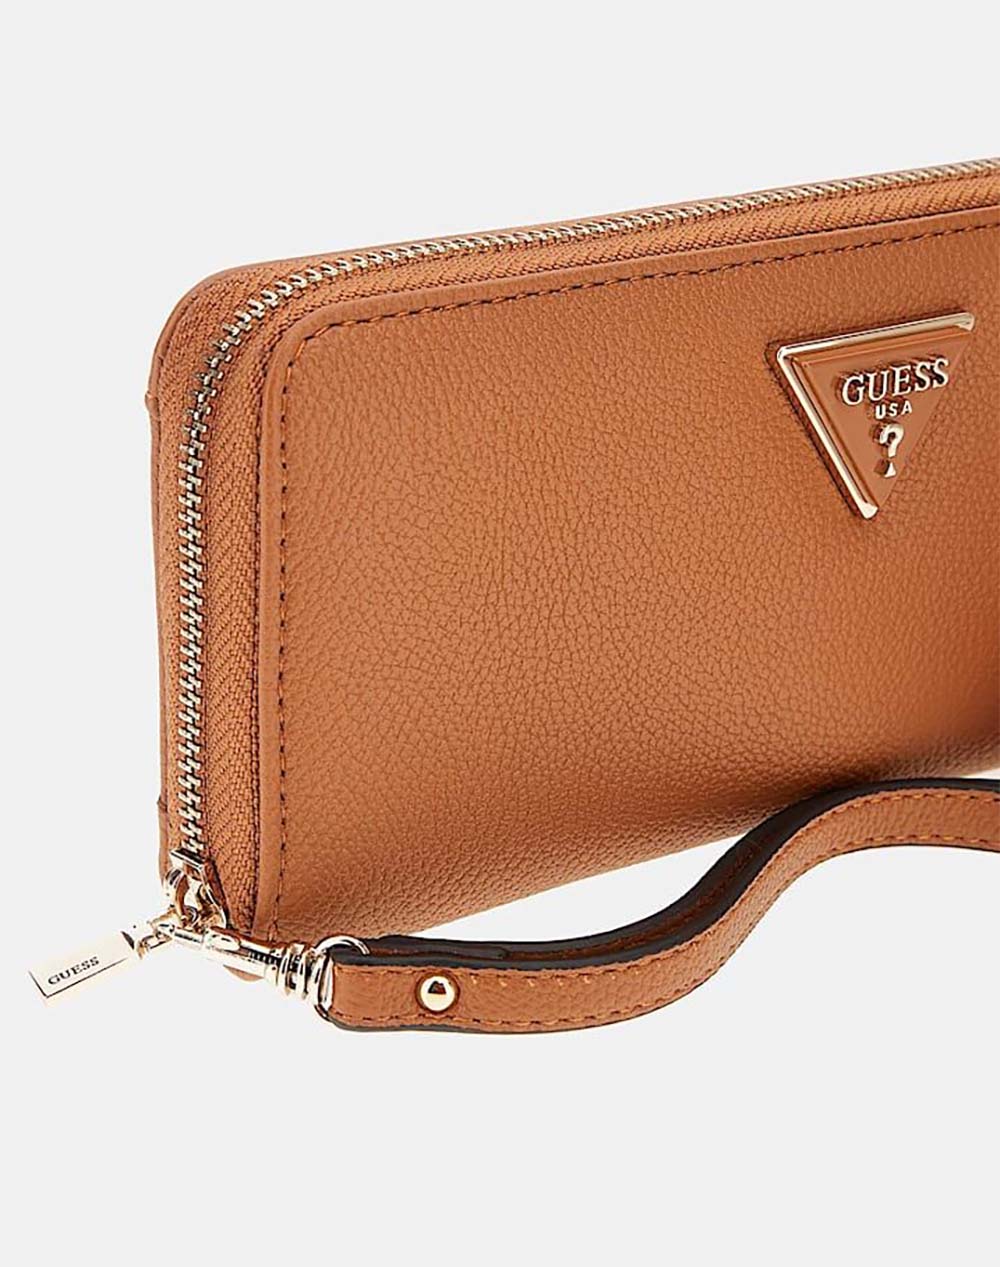 GUESS MERIDIAN SLG LARGE ZIP AROUND (Rozměry: 21 x 10 x 2 cm)